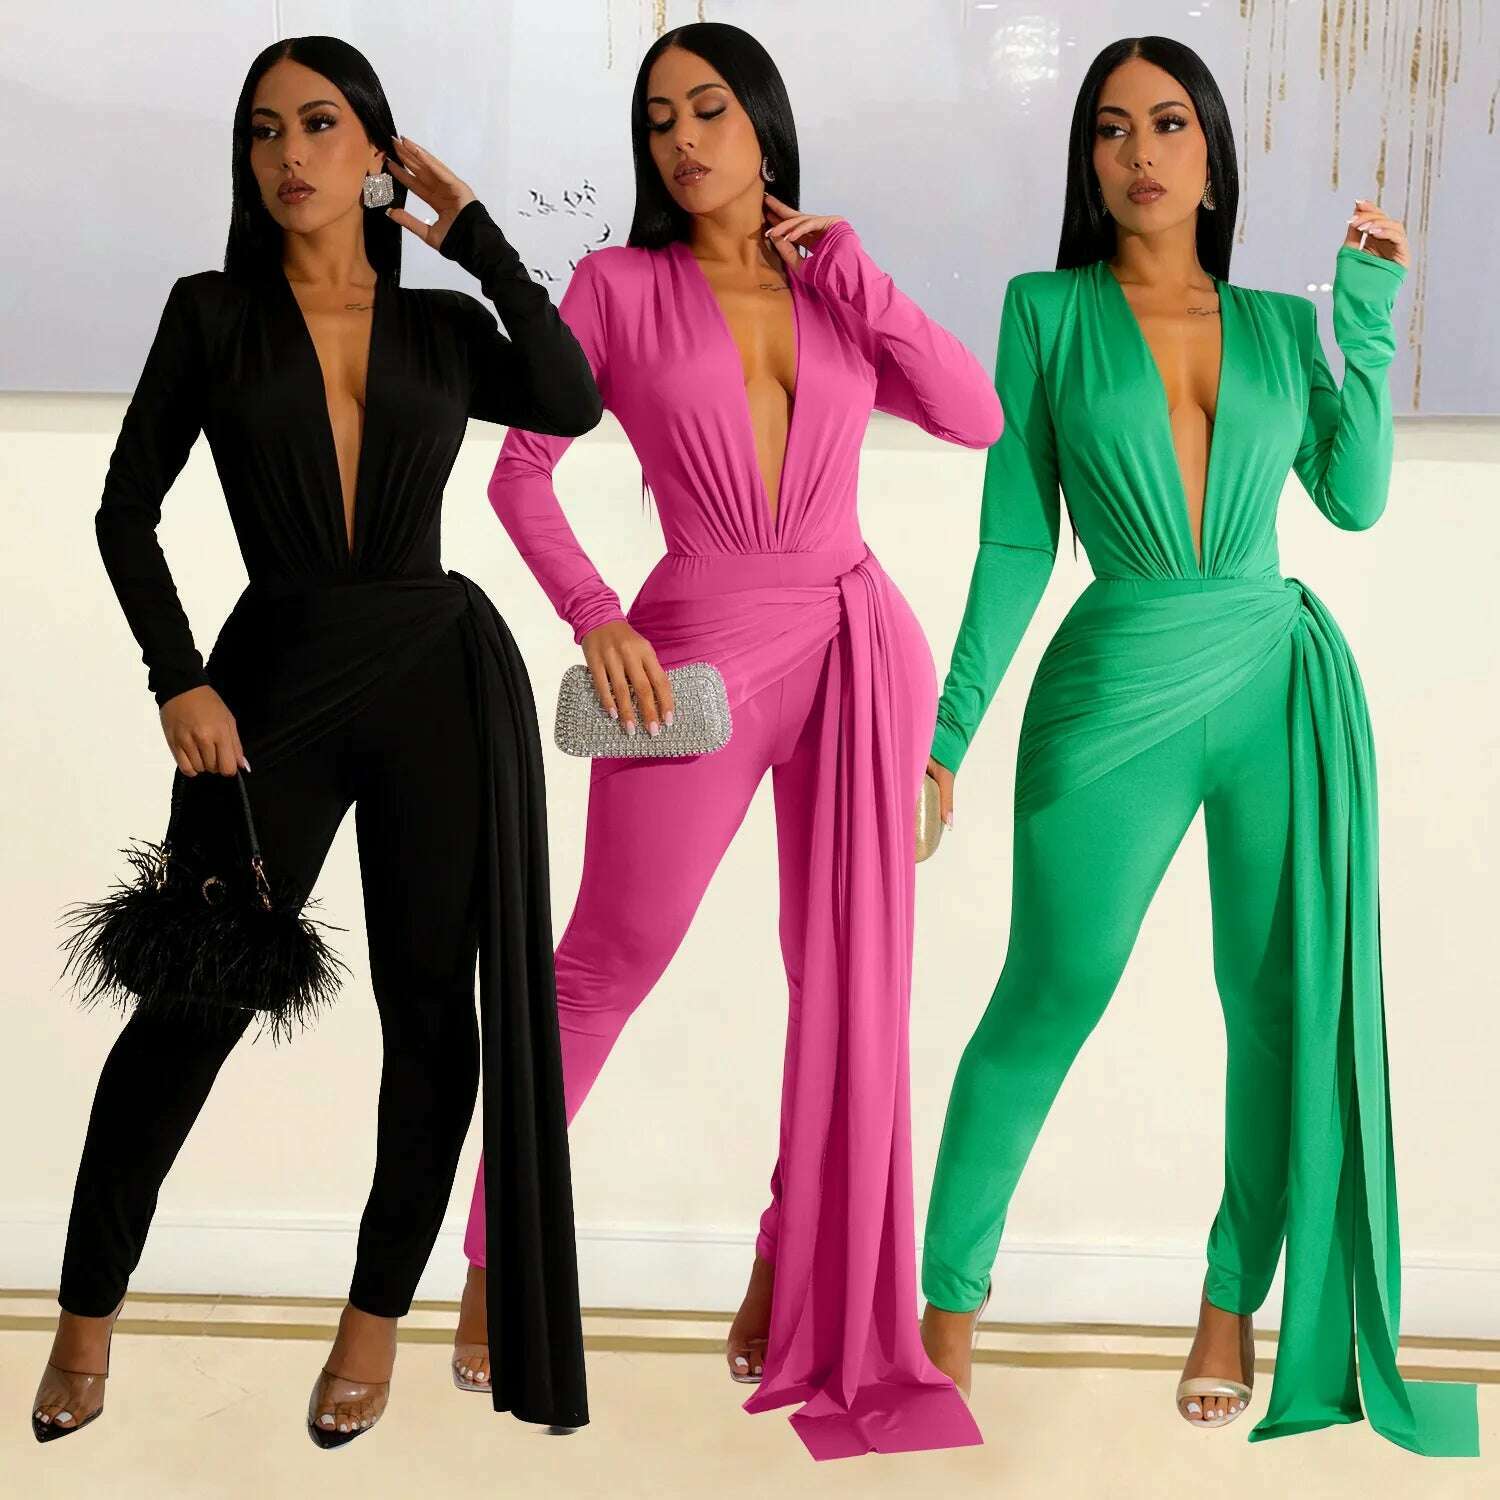 KIMLUD, Elegant Ribbon Bodycon Jumpsuits Sexy Long Sleeve Lace Up Romper Club Party Summer Women Clothes Overalls Luxury One Piece 2023, KIMLUD Women's Clothes